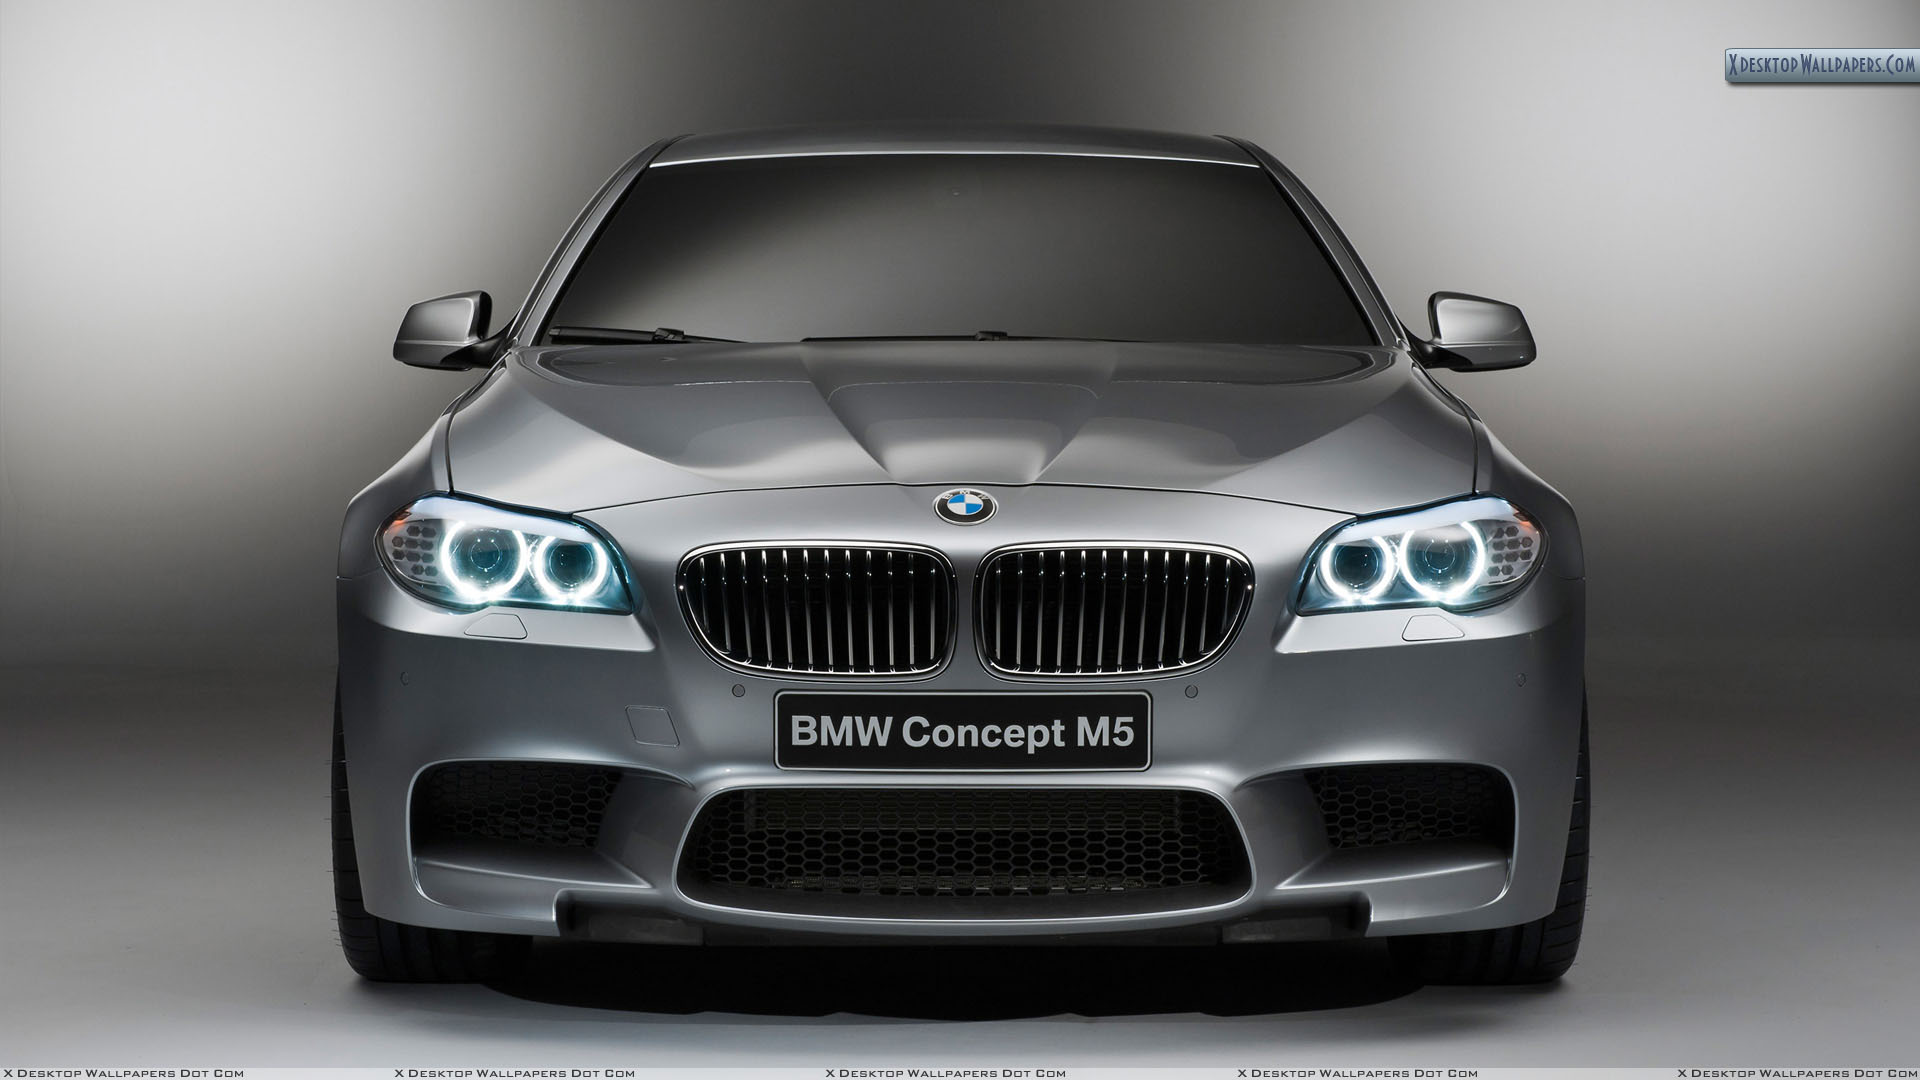 Download 03 Dec 2011 View. You are viewing wallpaper titled "Front Closeup Picture of 2012 BMW M5 ...